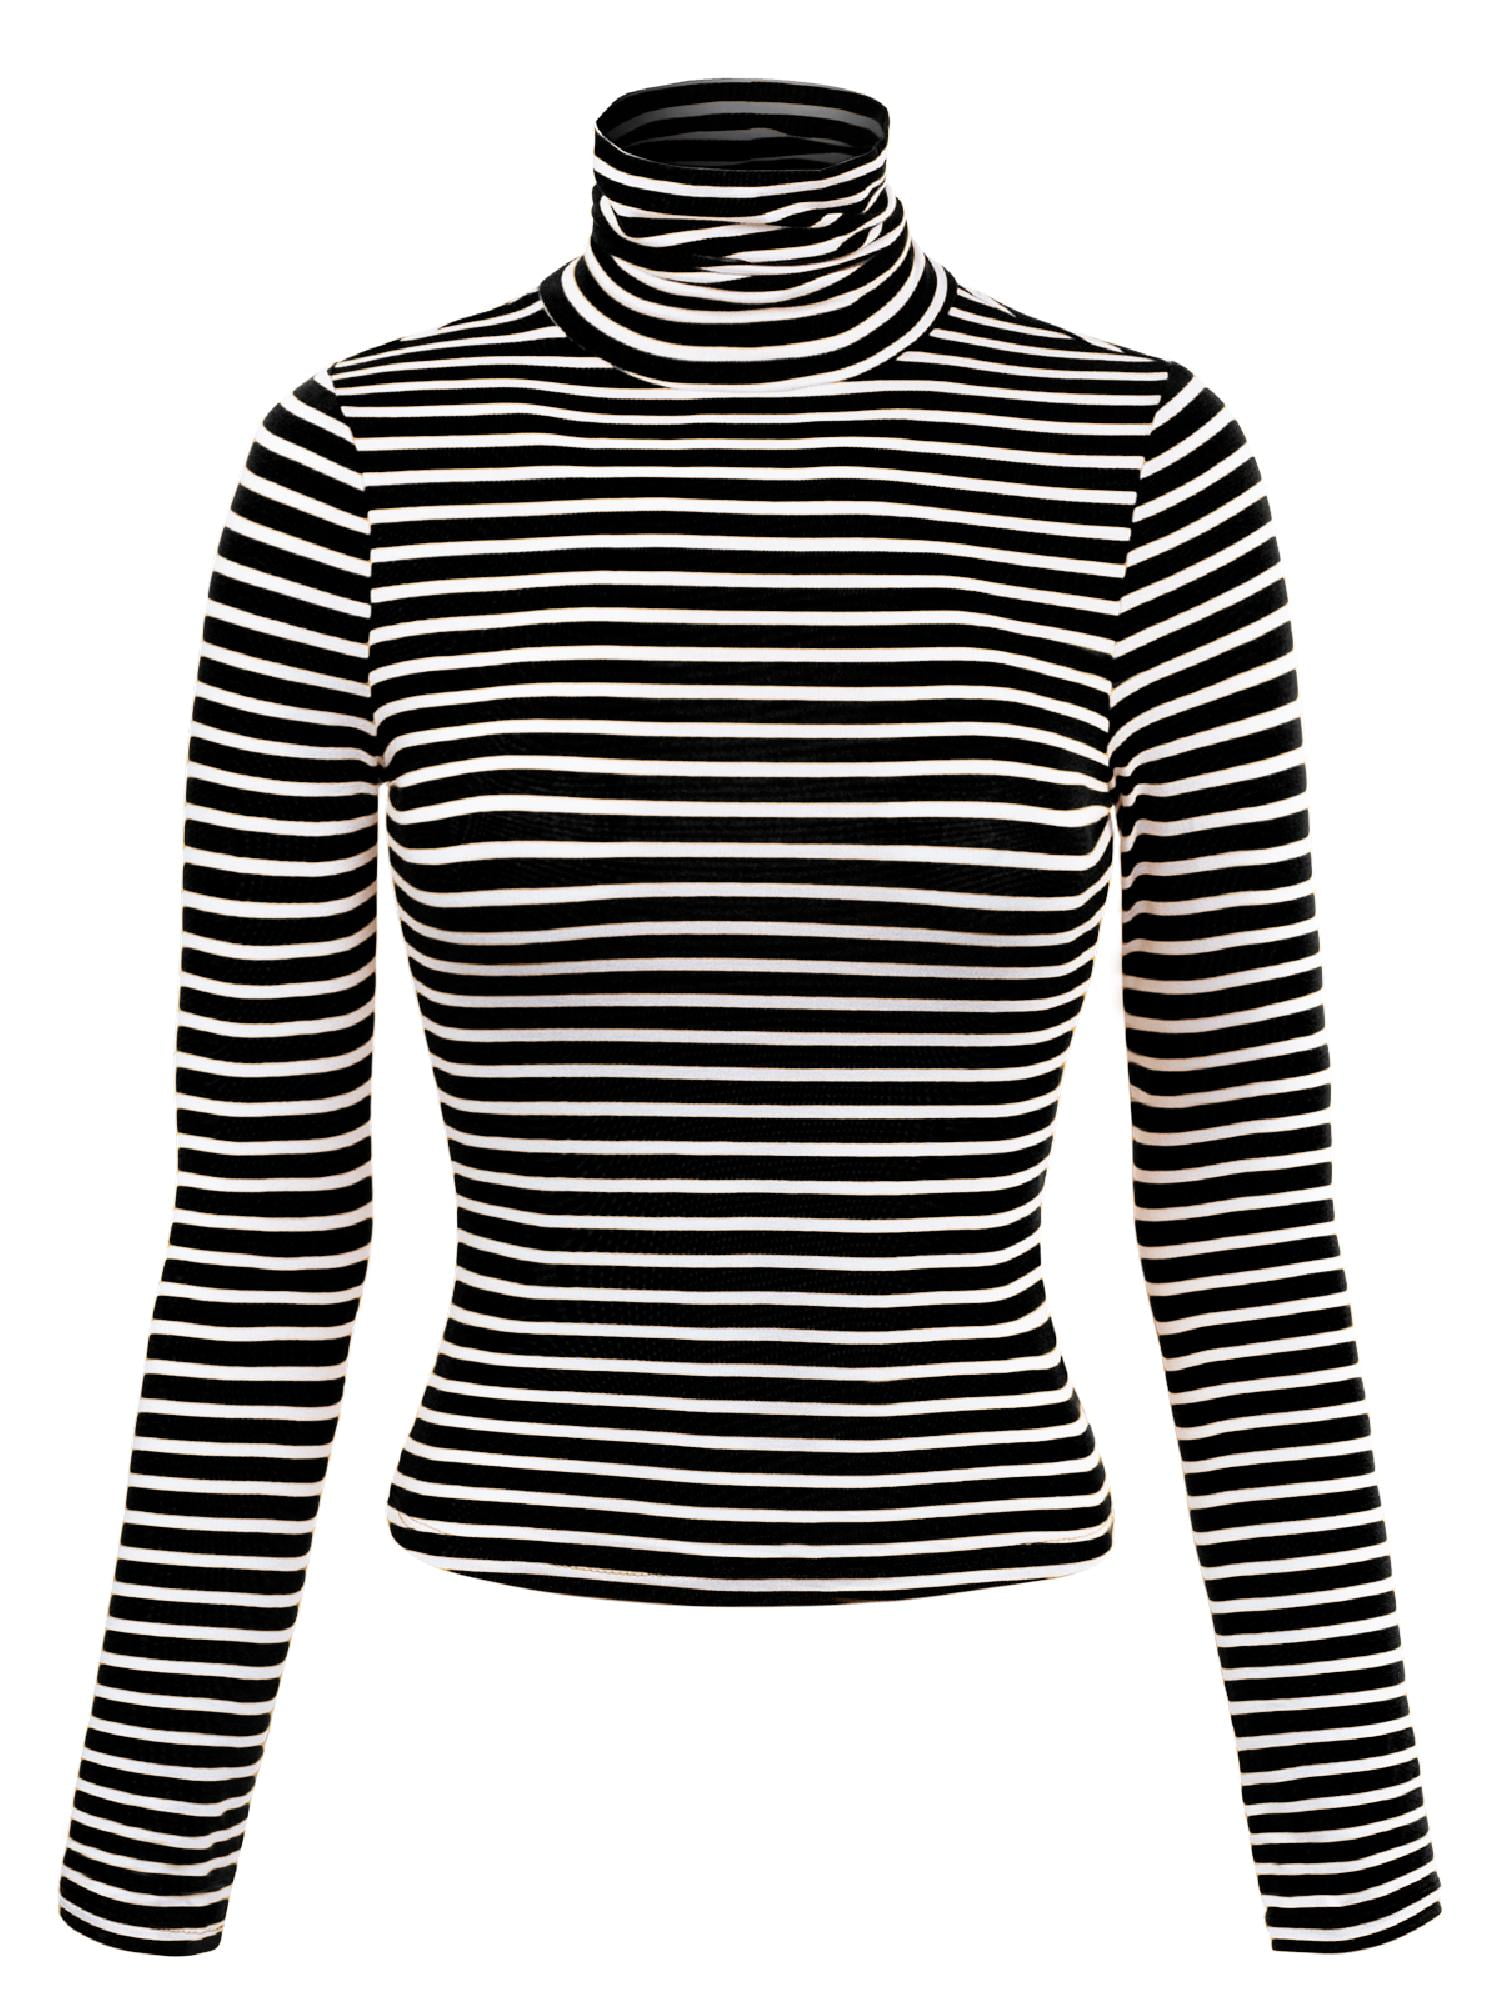 MixMatchy Women's Tight Fit Lightweight Solid/Stripe Long Sleeves Turtle Neck Top 